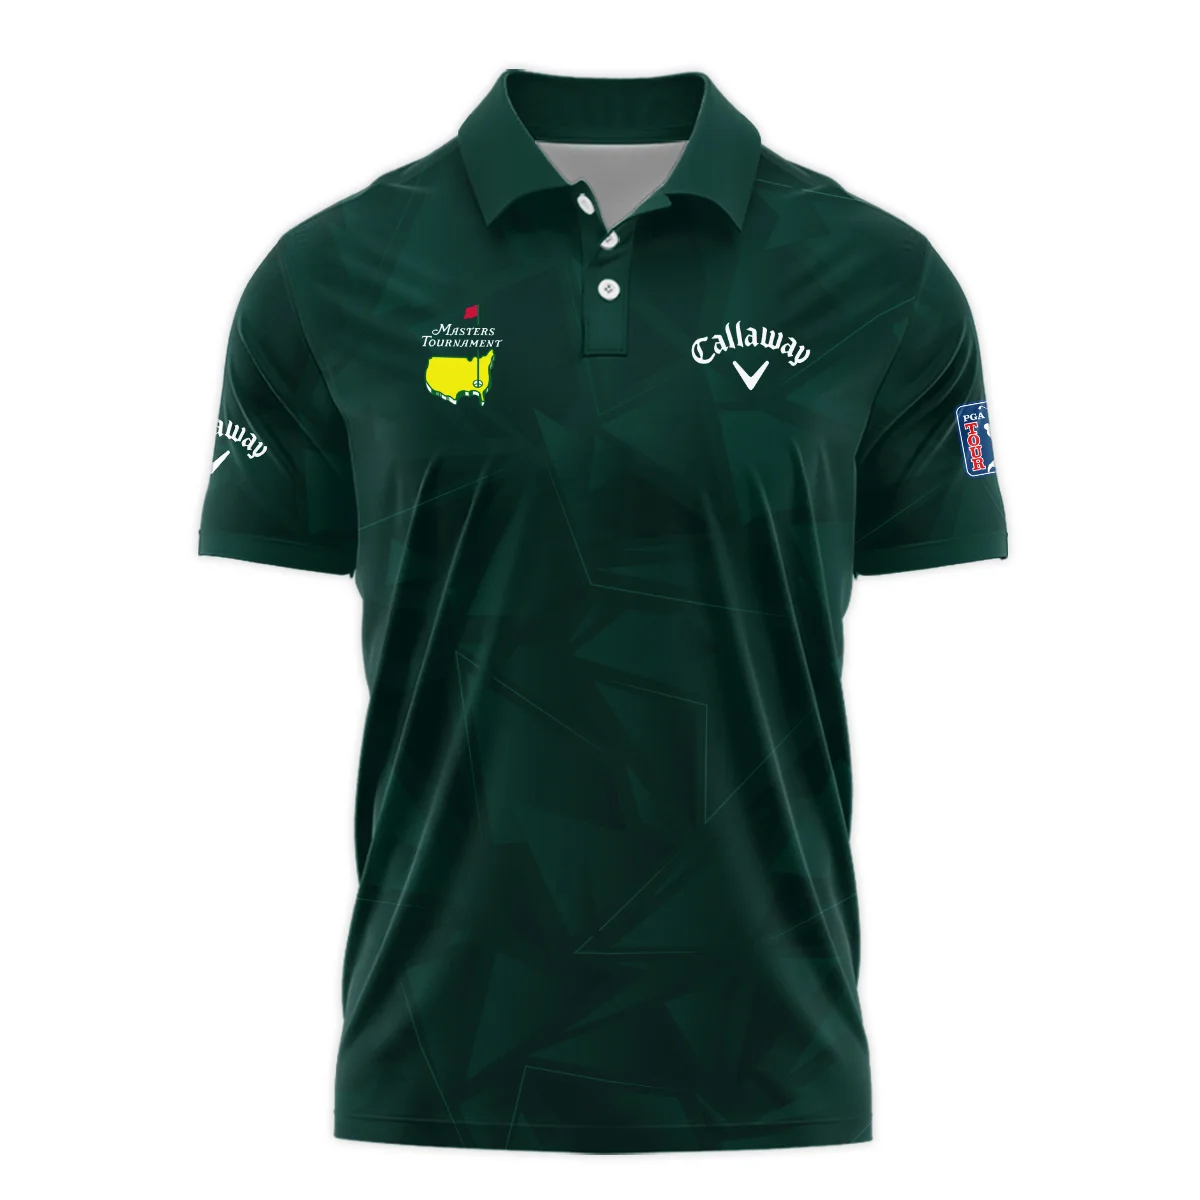 Dark Green Abstract Sport Masters Tournament Callaway Long Polo Shirt Style Classic Long Polo Shirt For Men